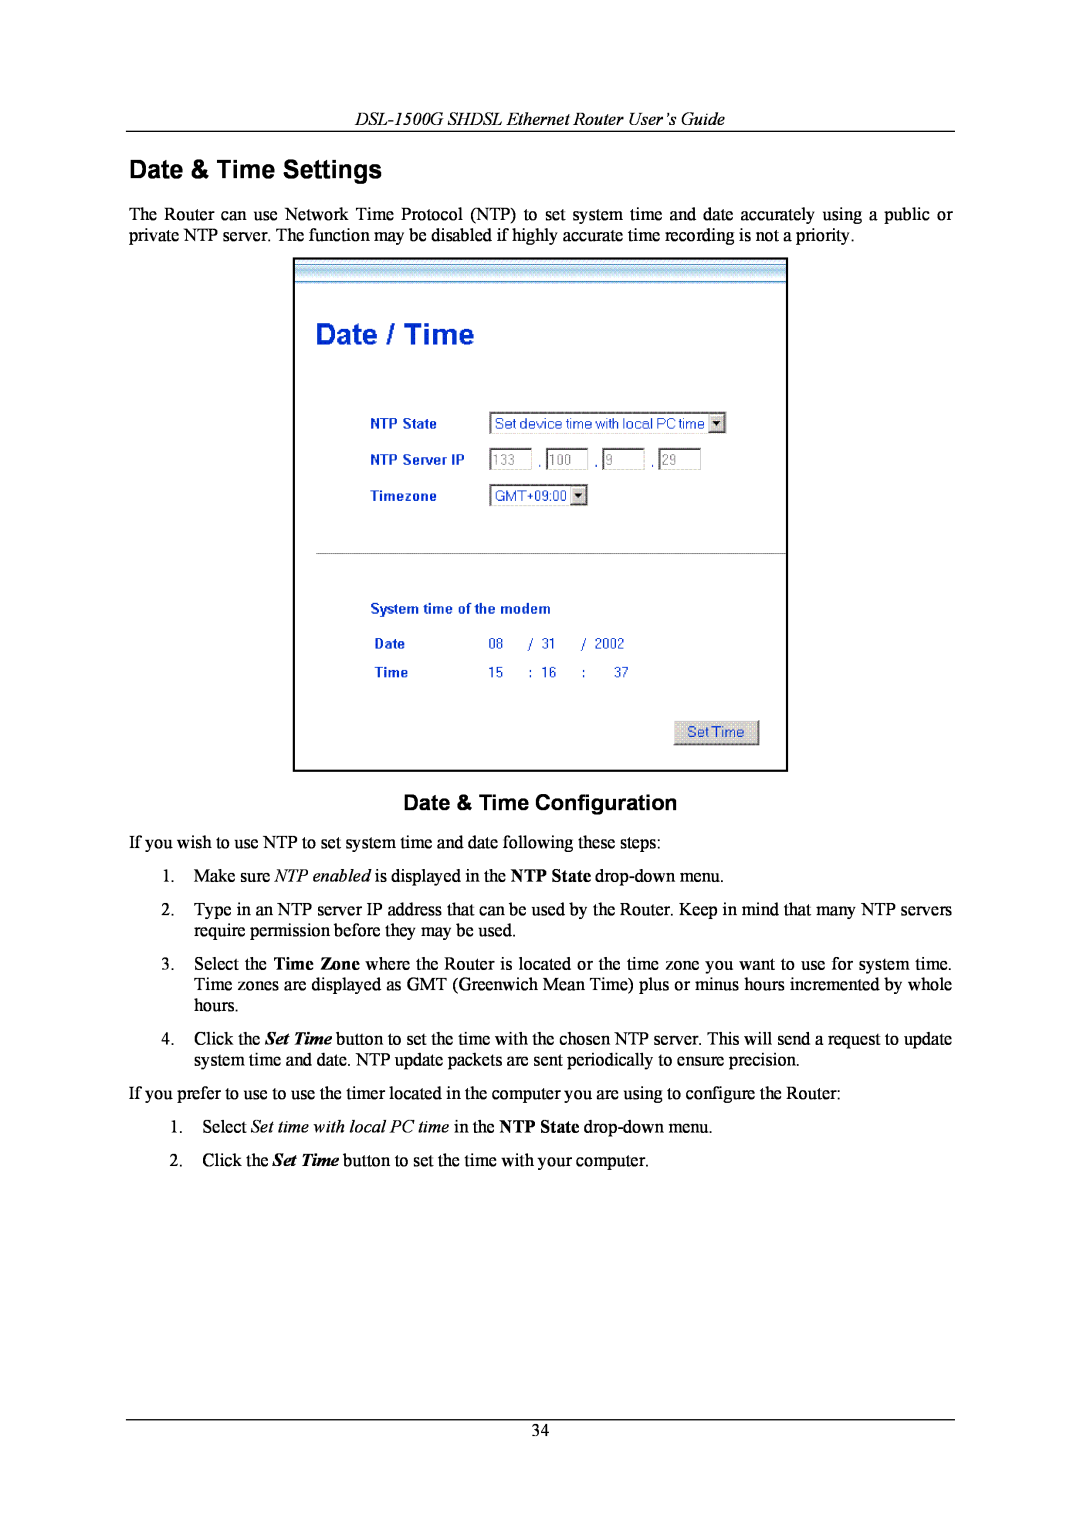 D-Link manual Date & Time Settings, Date & Time Configuration, DSL-1500G SHDSL Ethernet Router User’s Guide 